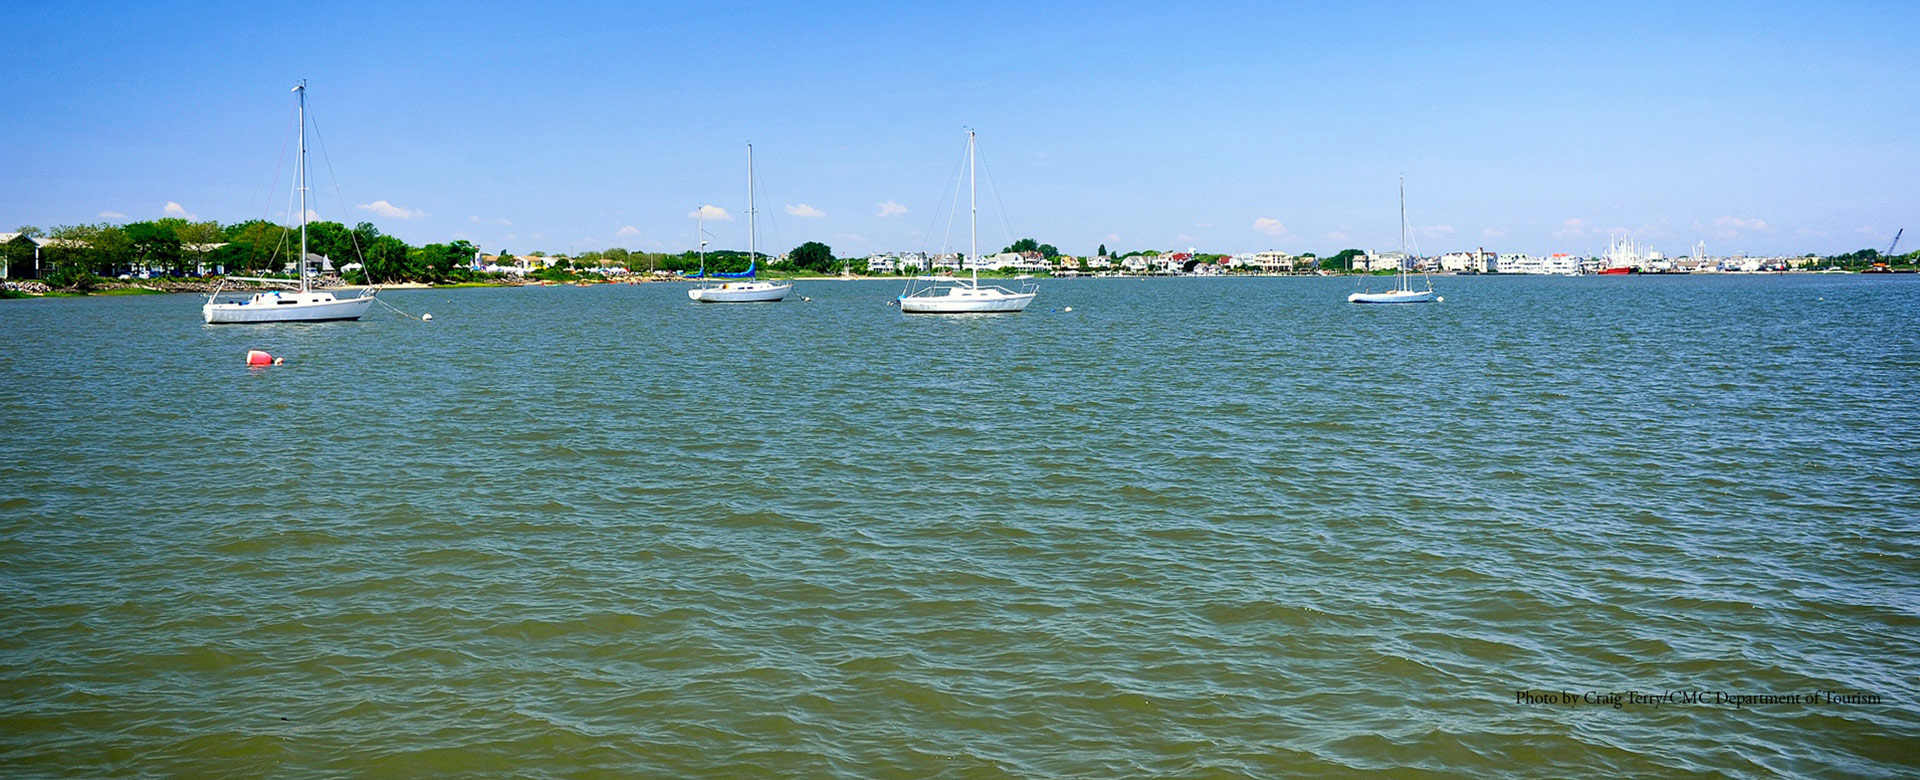 Sailboats in the Cape May Harbor